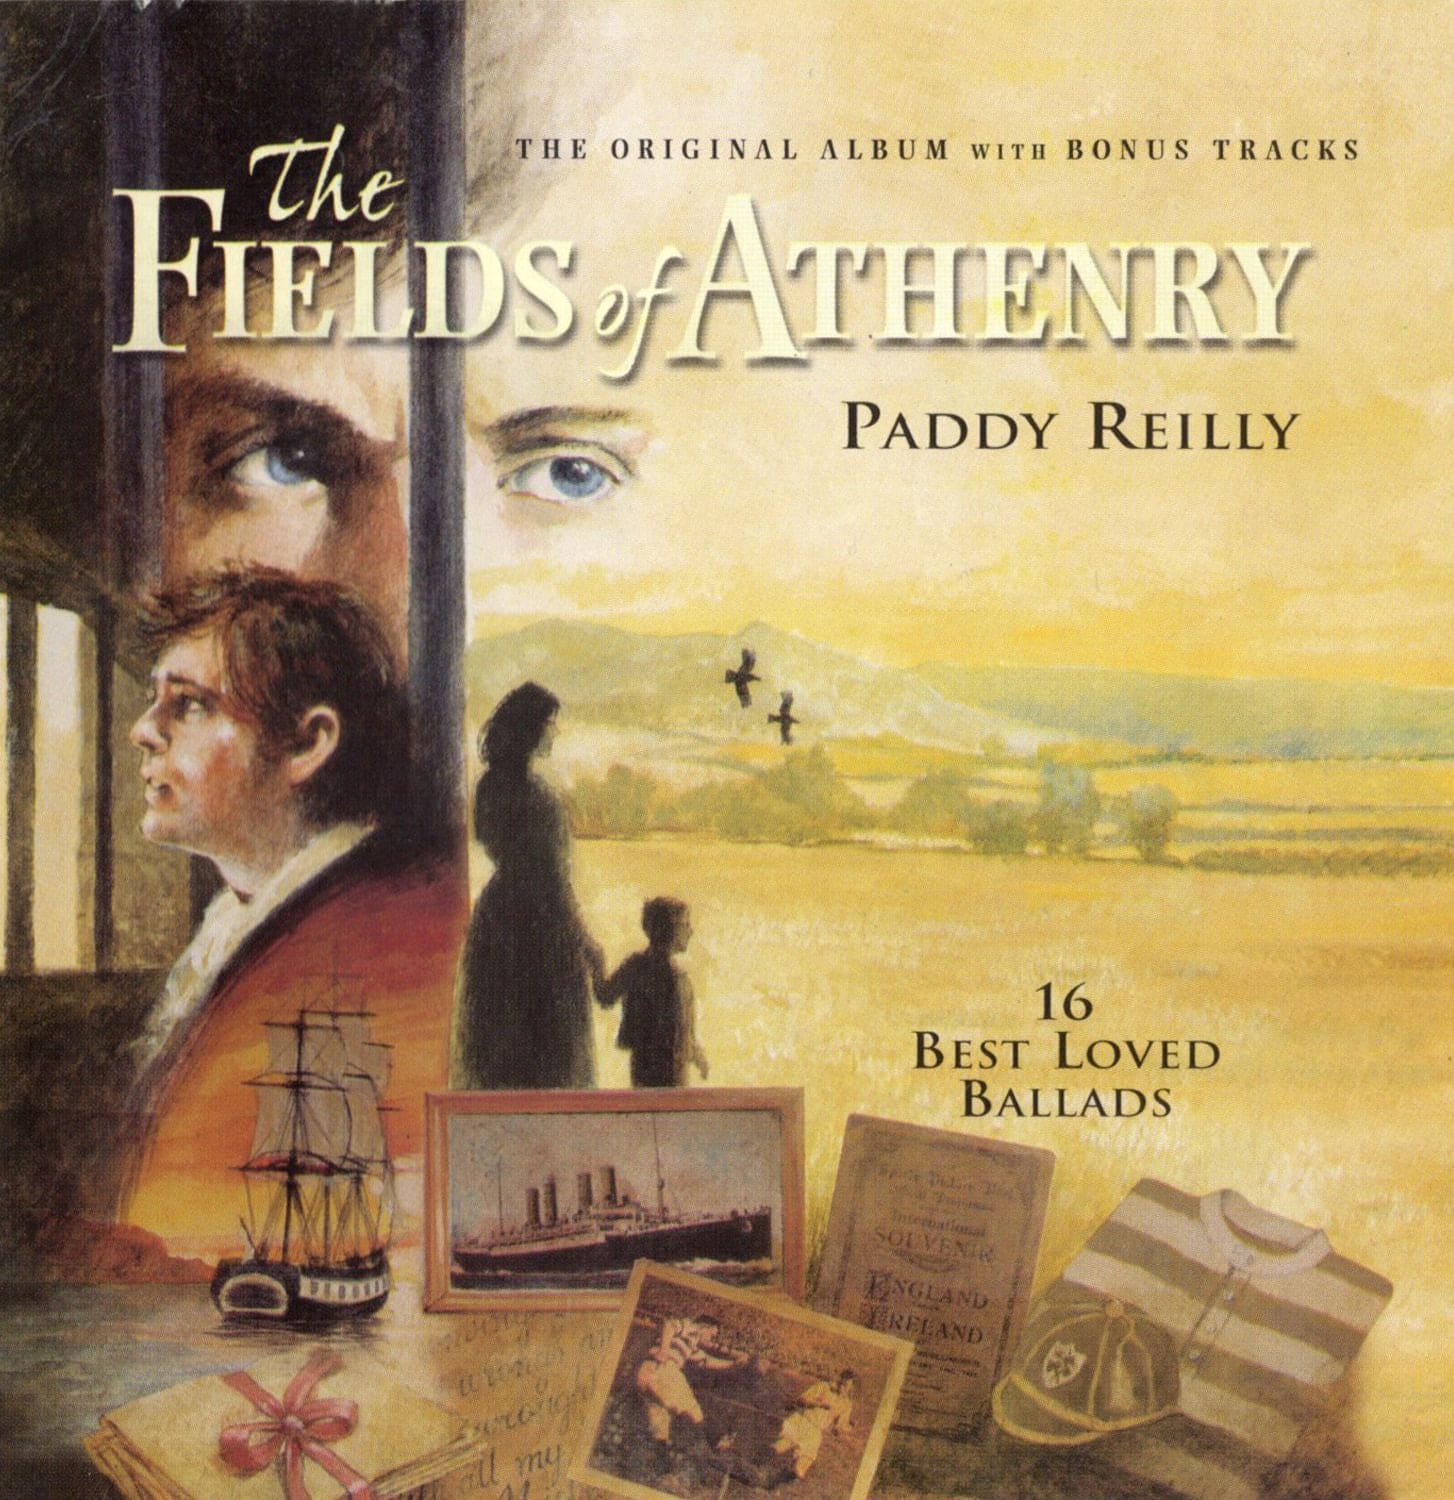 The Fields Of Athenry - Paddy Reilly [CD]